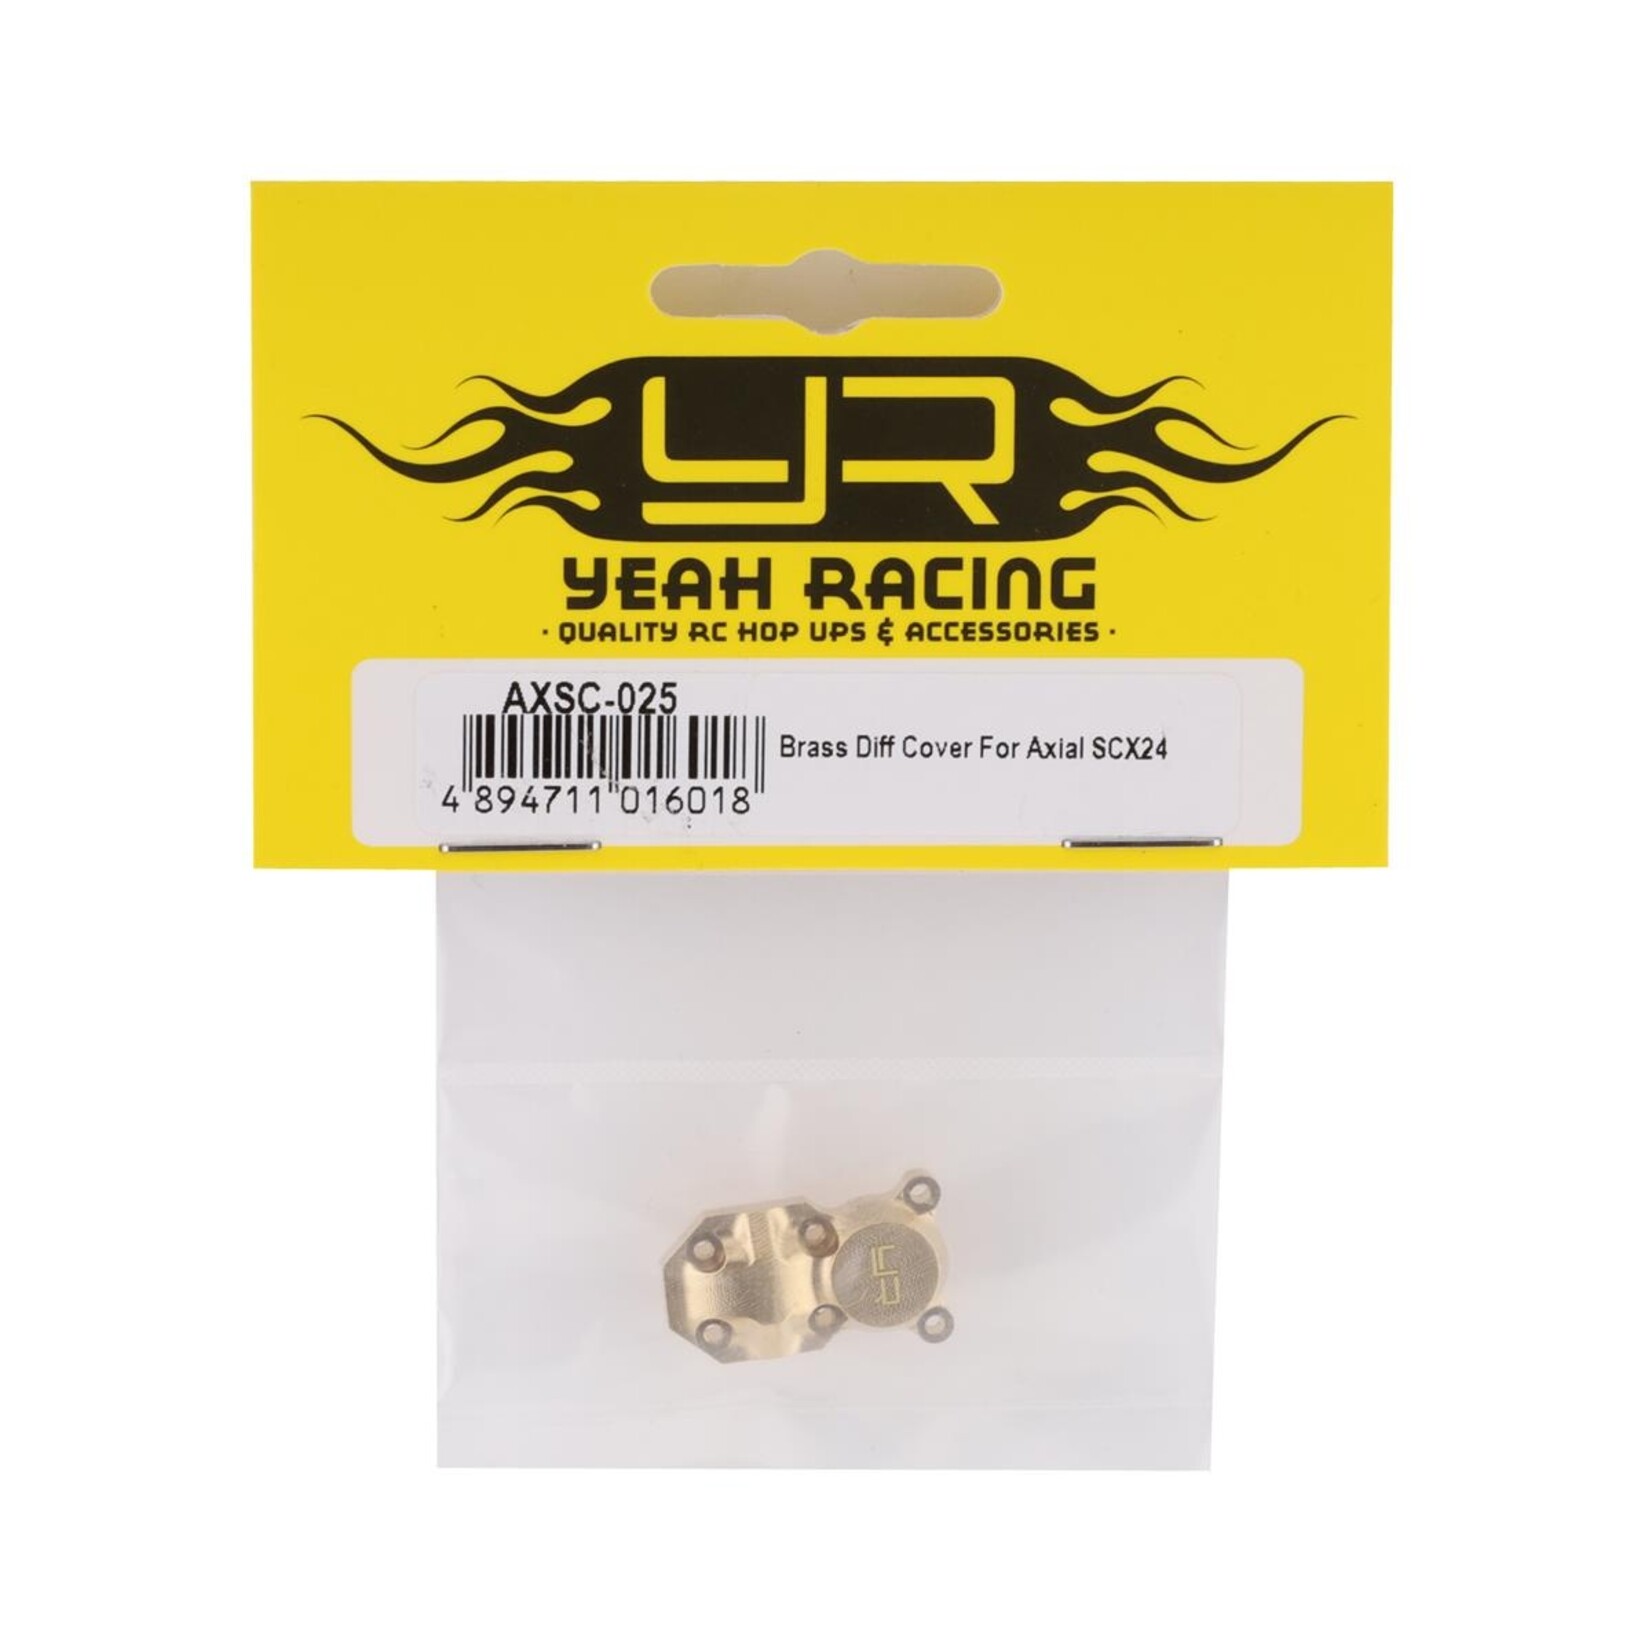 Yeah Racing Yeah Racing SCX24 Brass Differential Cover (5.5g) #AXSC-025